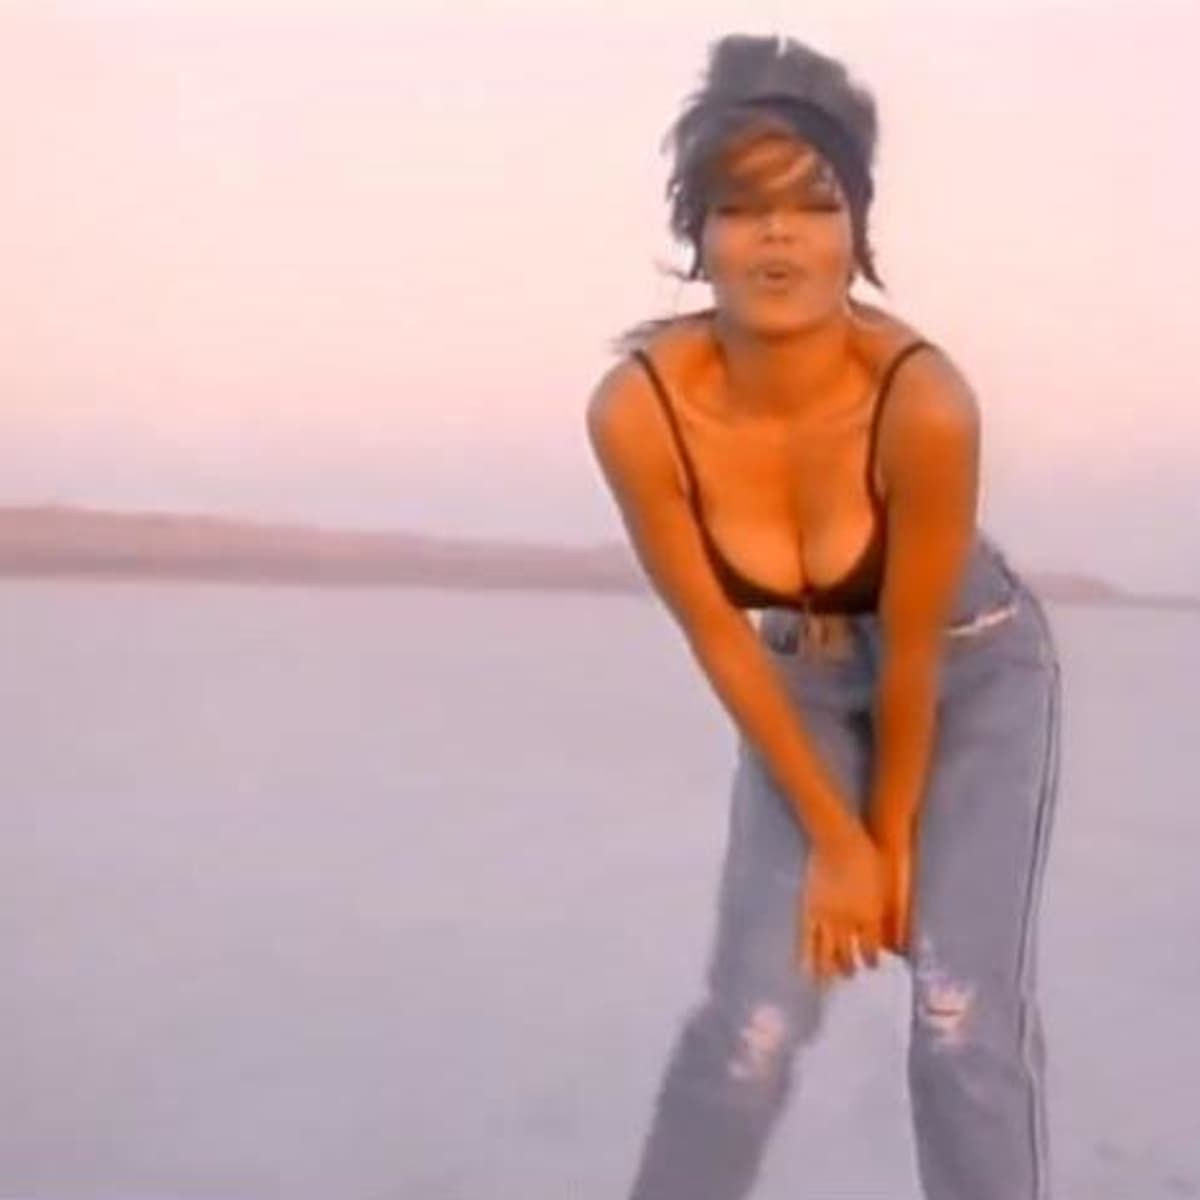 Big Wet Tits Music Video - The 50 Sexiest Music Videos of the '90s - Spinditty